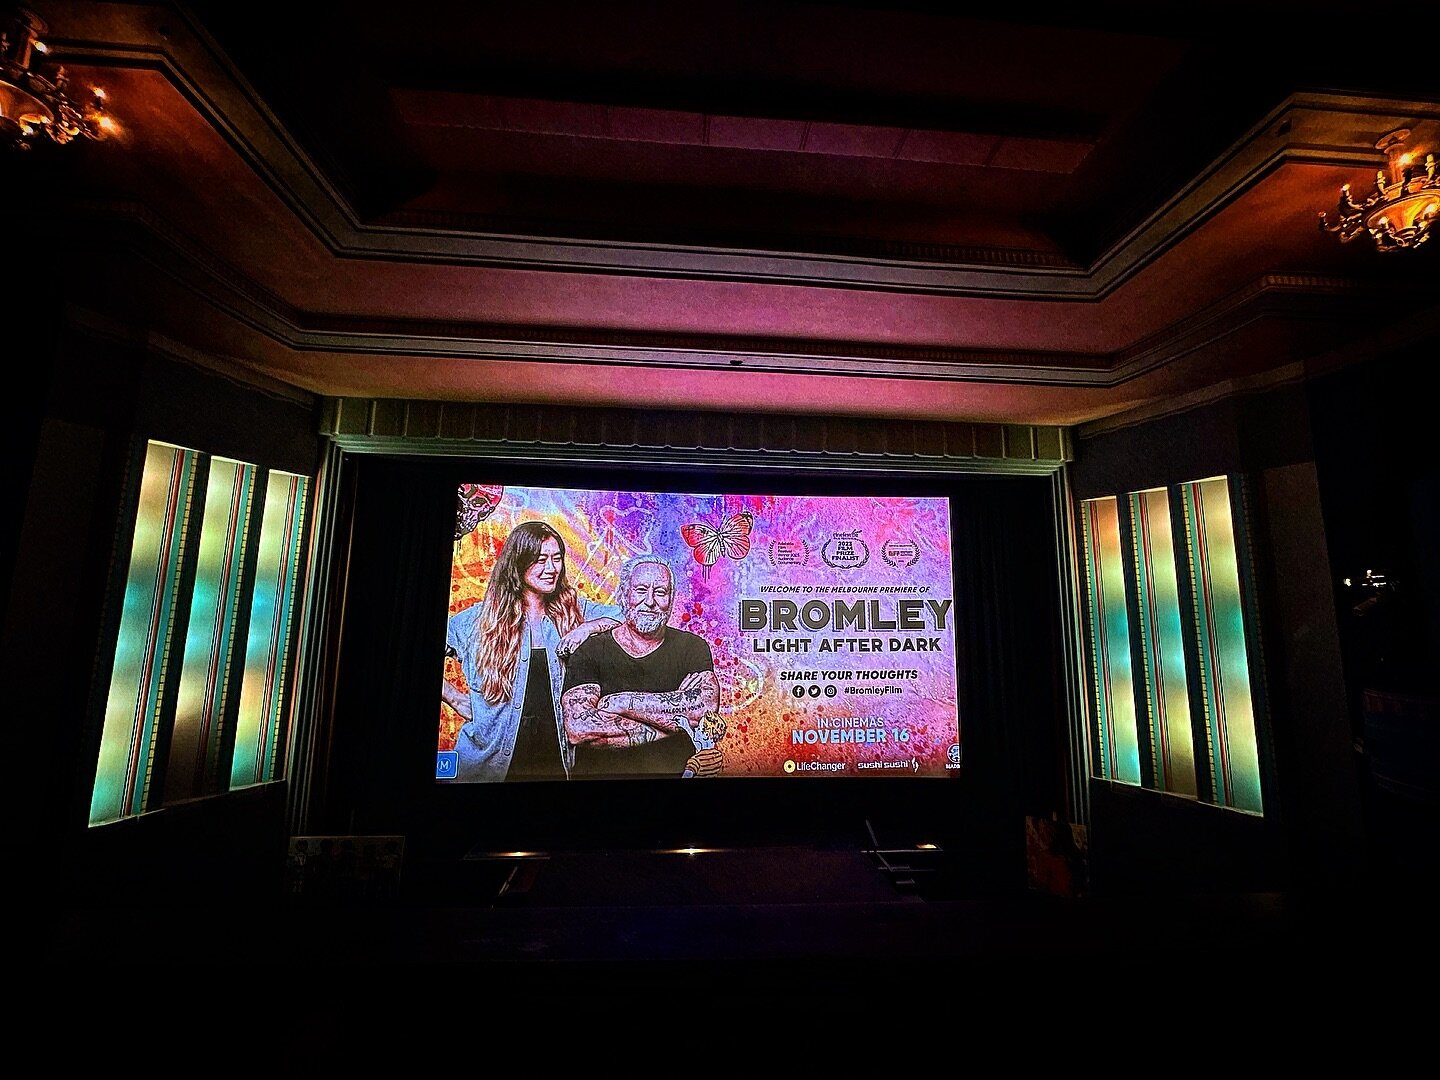 So in awe of the amazing creative team (and the man himself!) behind #bromleyfilm which premiered at the Astor theatre tonight. ✨
To the incredible filmmaker @smcdphotography, beautiful producers (including my life idol the insanely talented) Clare @